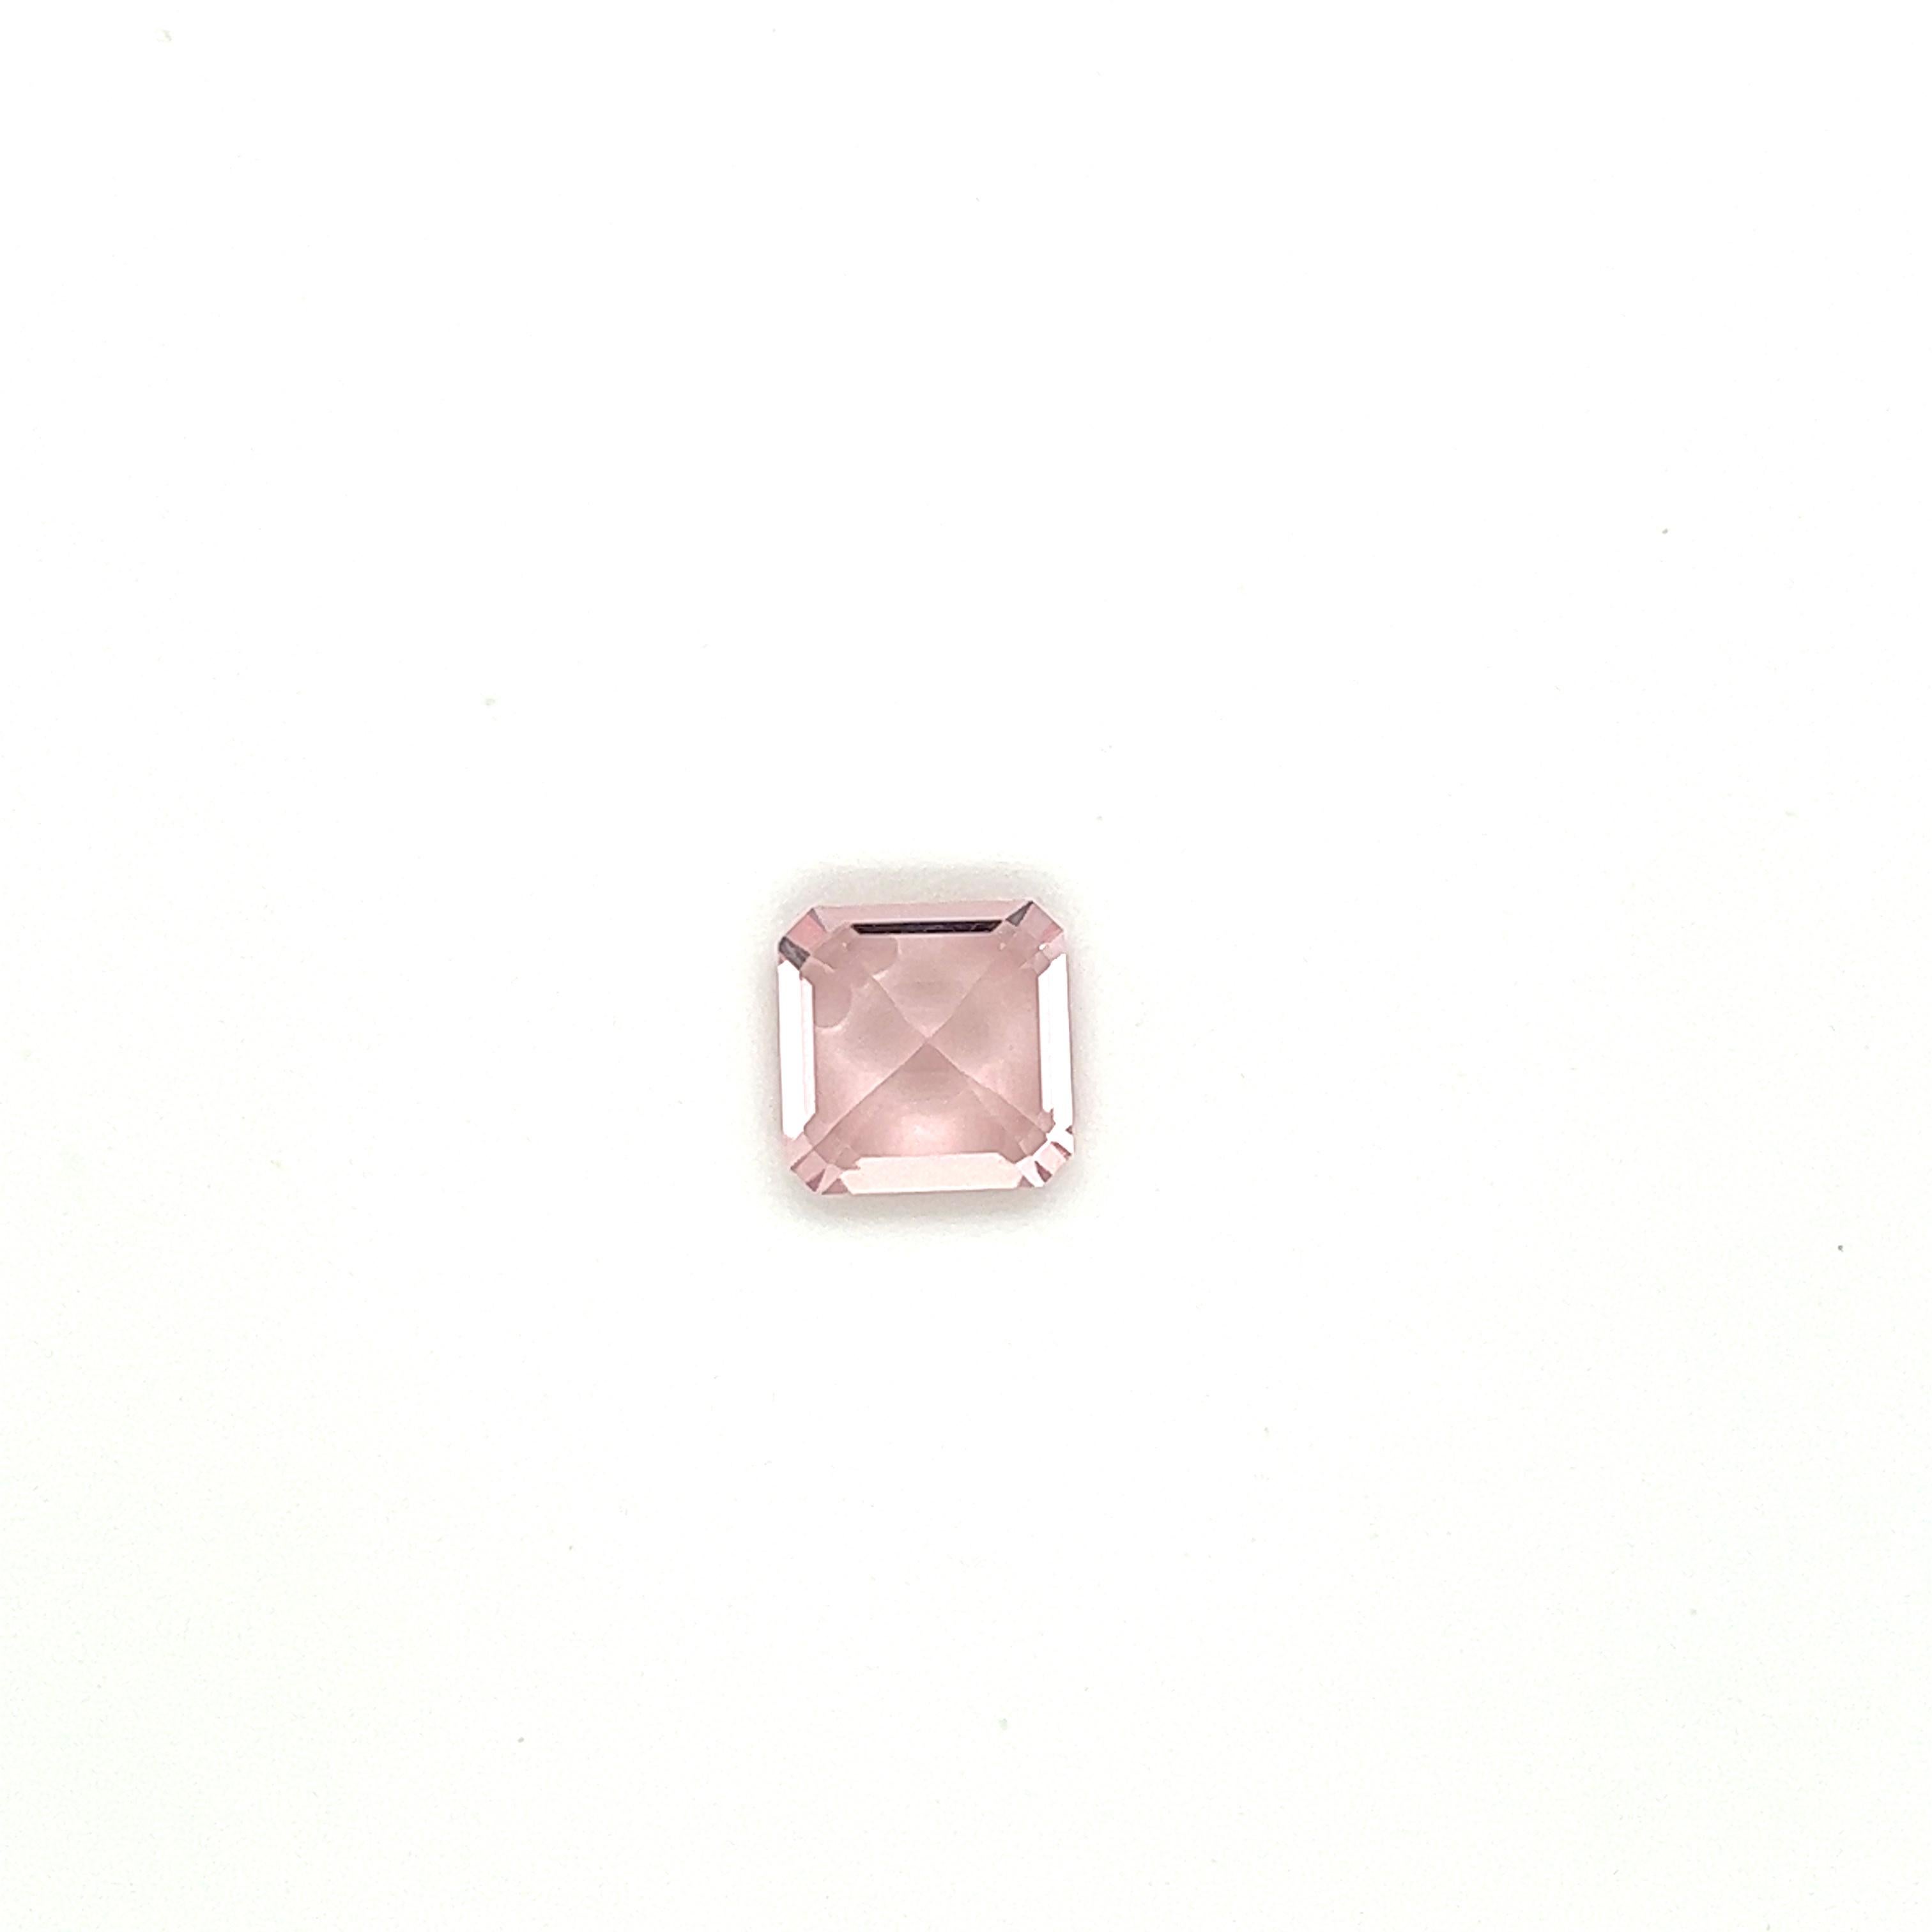 3.05 Carat AAA Natural Pink Morganite Asher Cut Shape Loose Gemstone Jewelry In New Condition For Sale In New York, NY